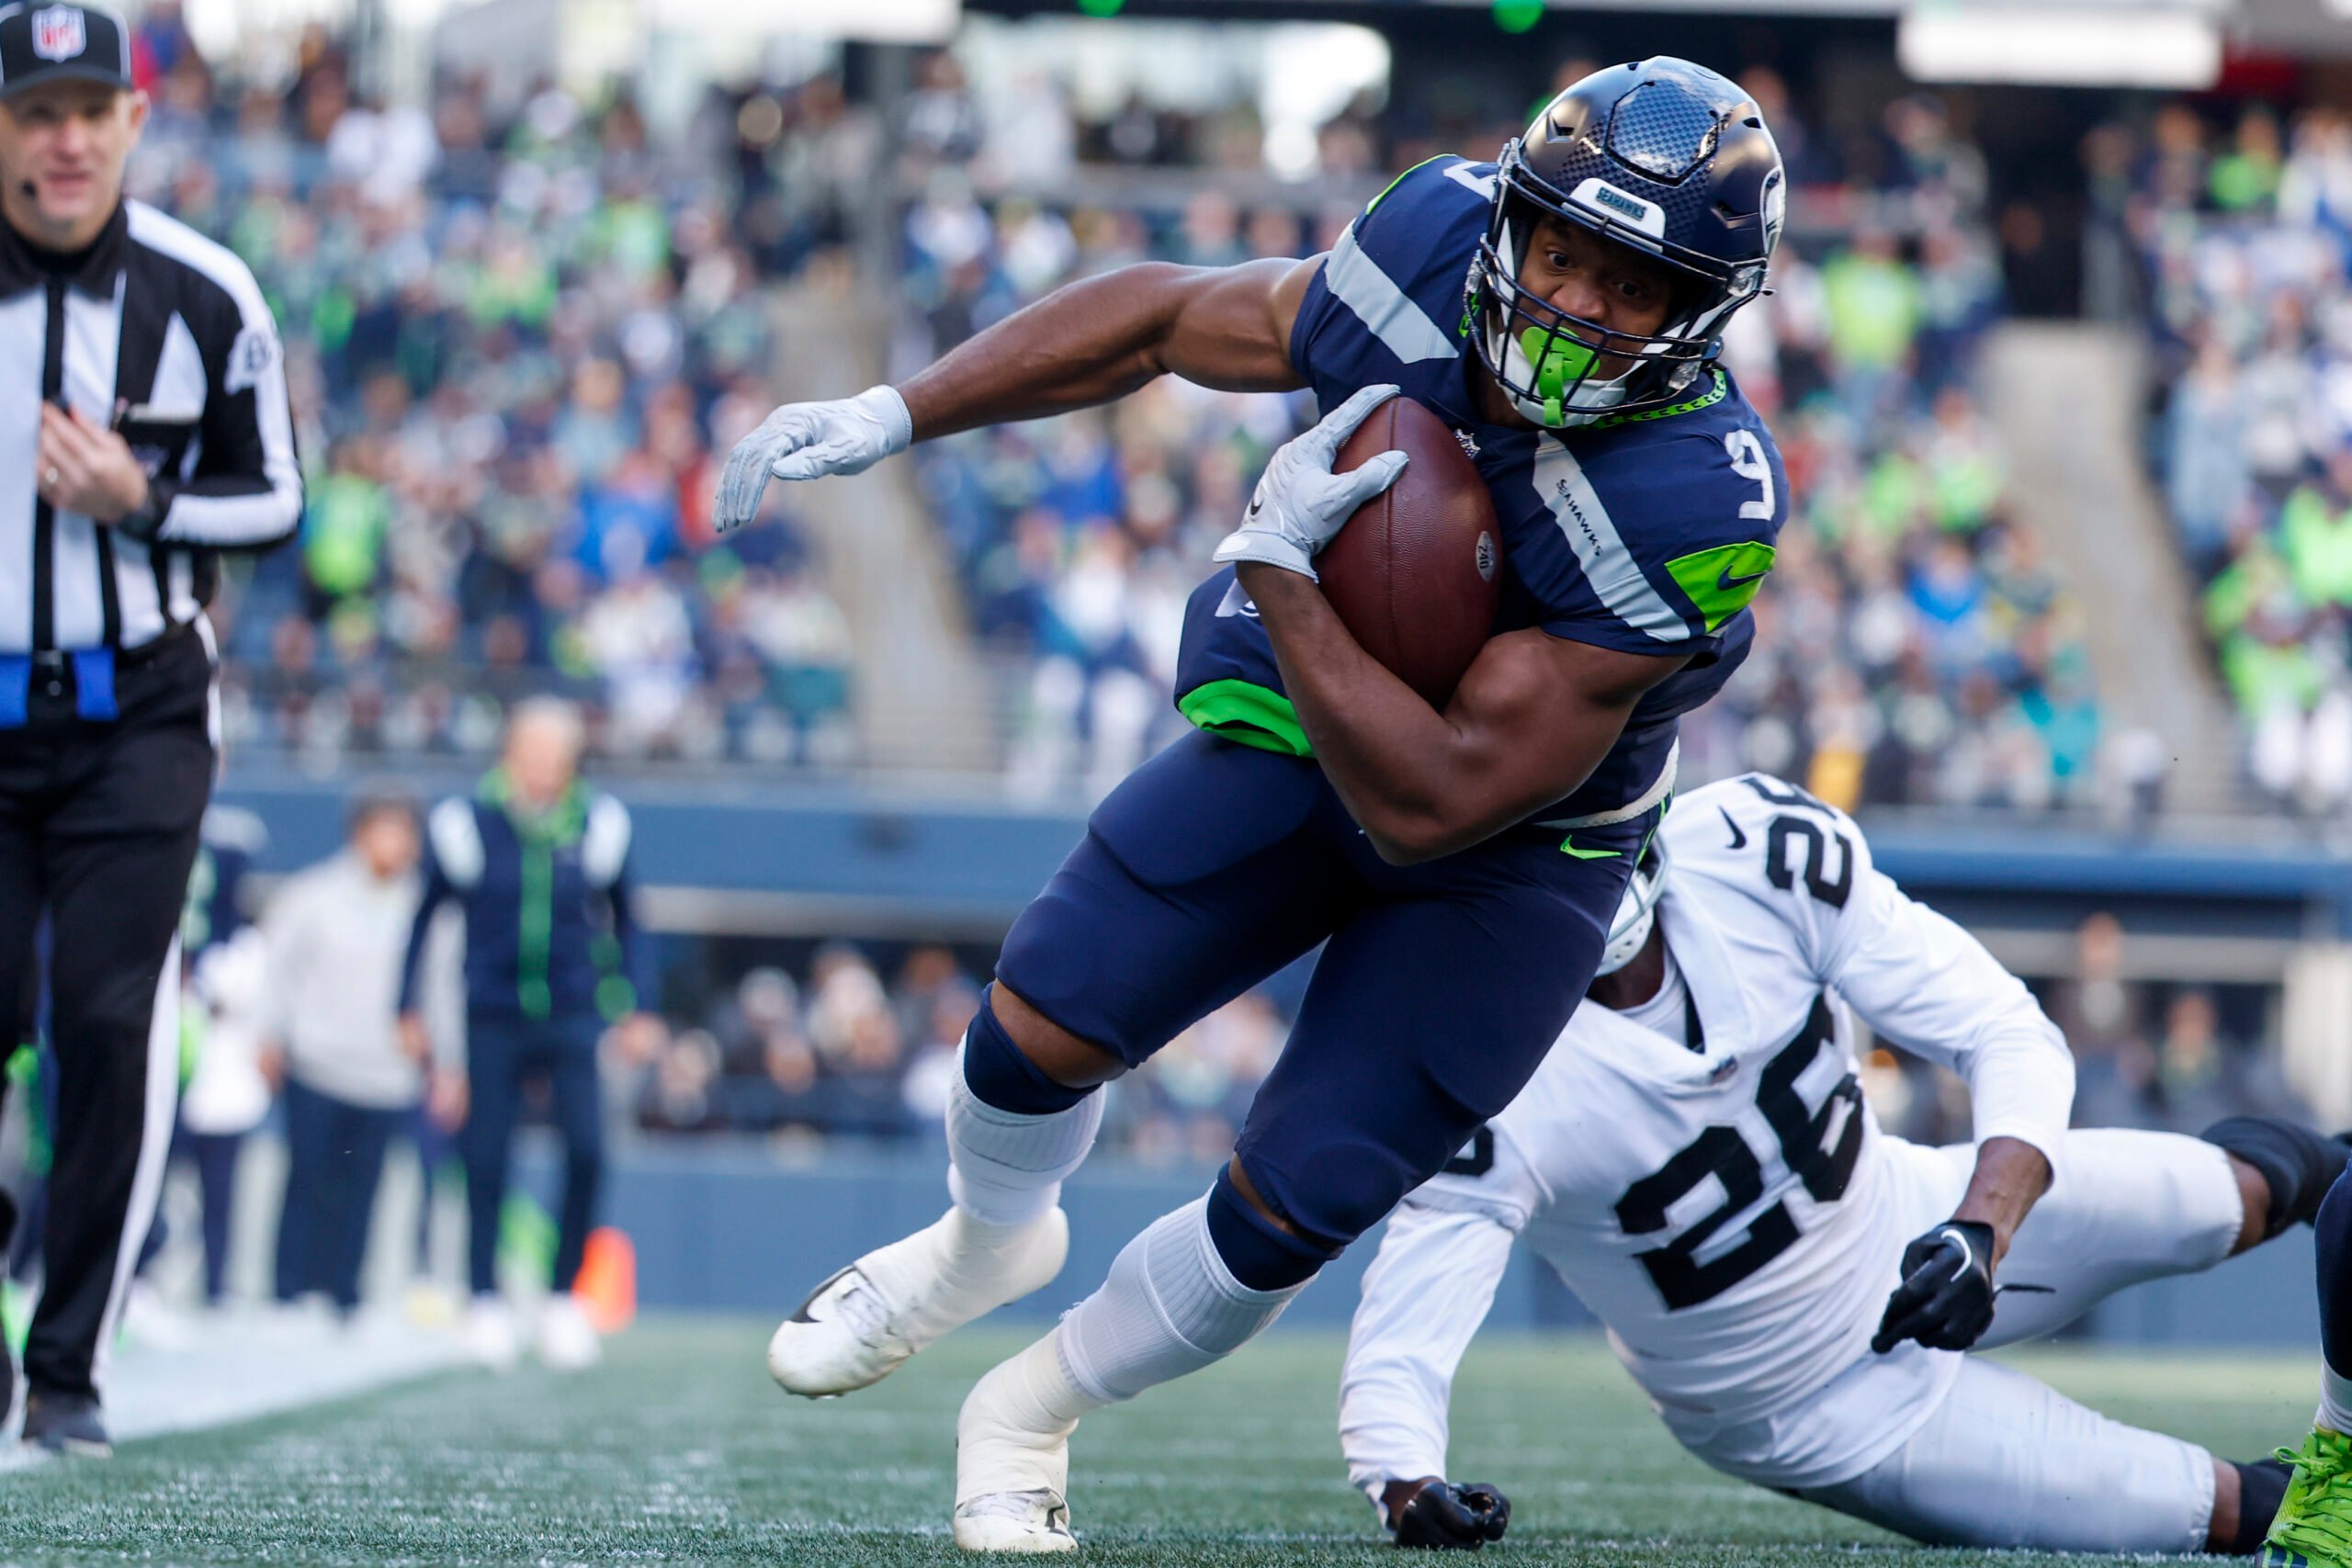 What To Watch In The Seahawks' Week 17 Game vs. The Jets